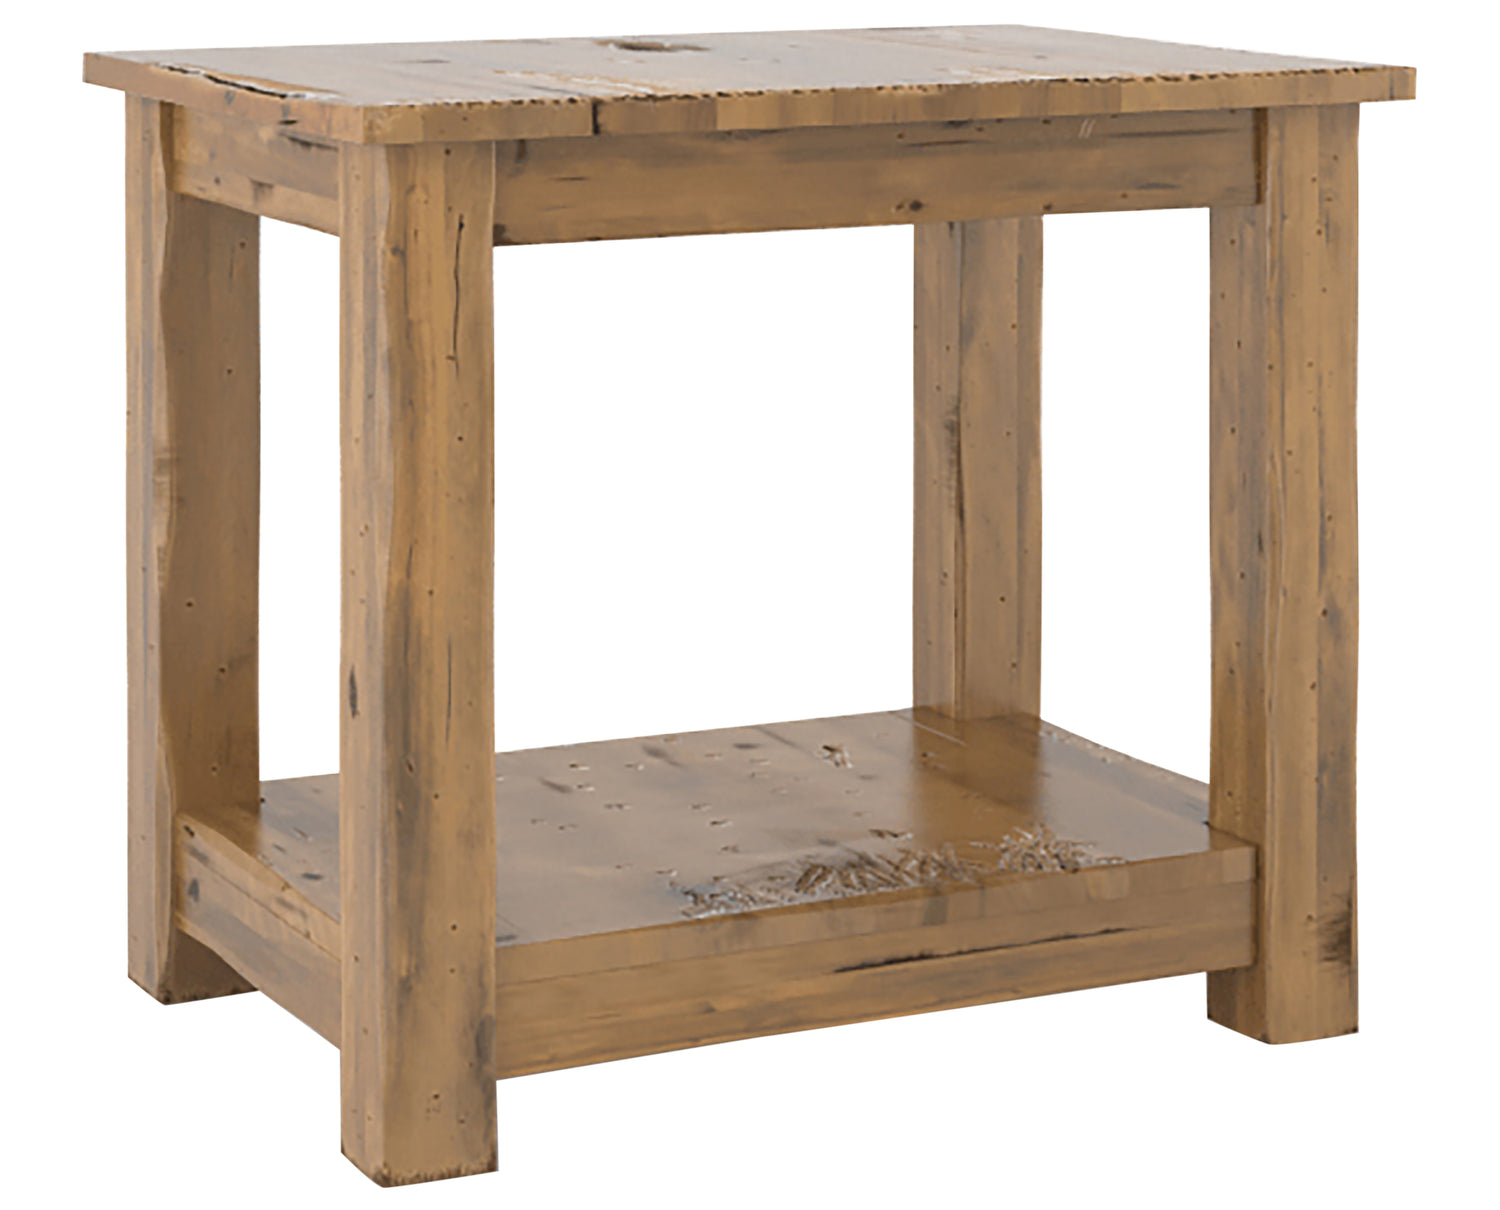 Oak Washed with HJ Legs | Canadel Champlain End Table 2820 | Valley Ridge Furniture